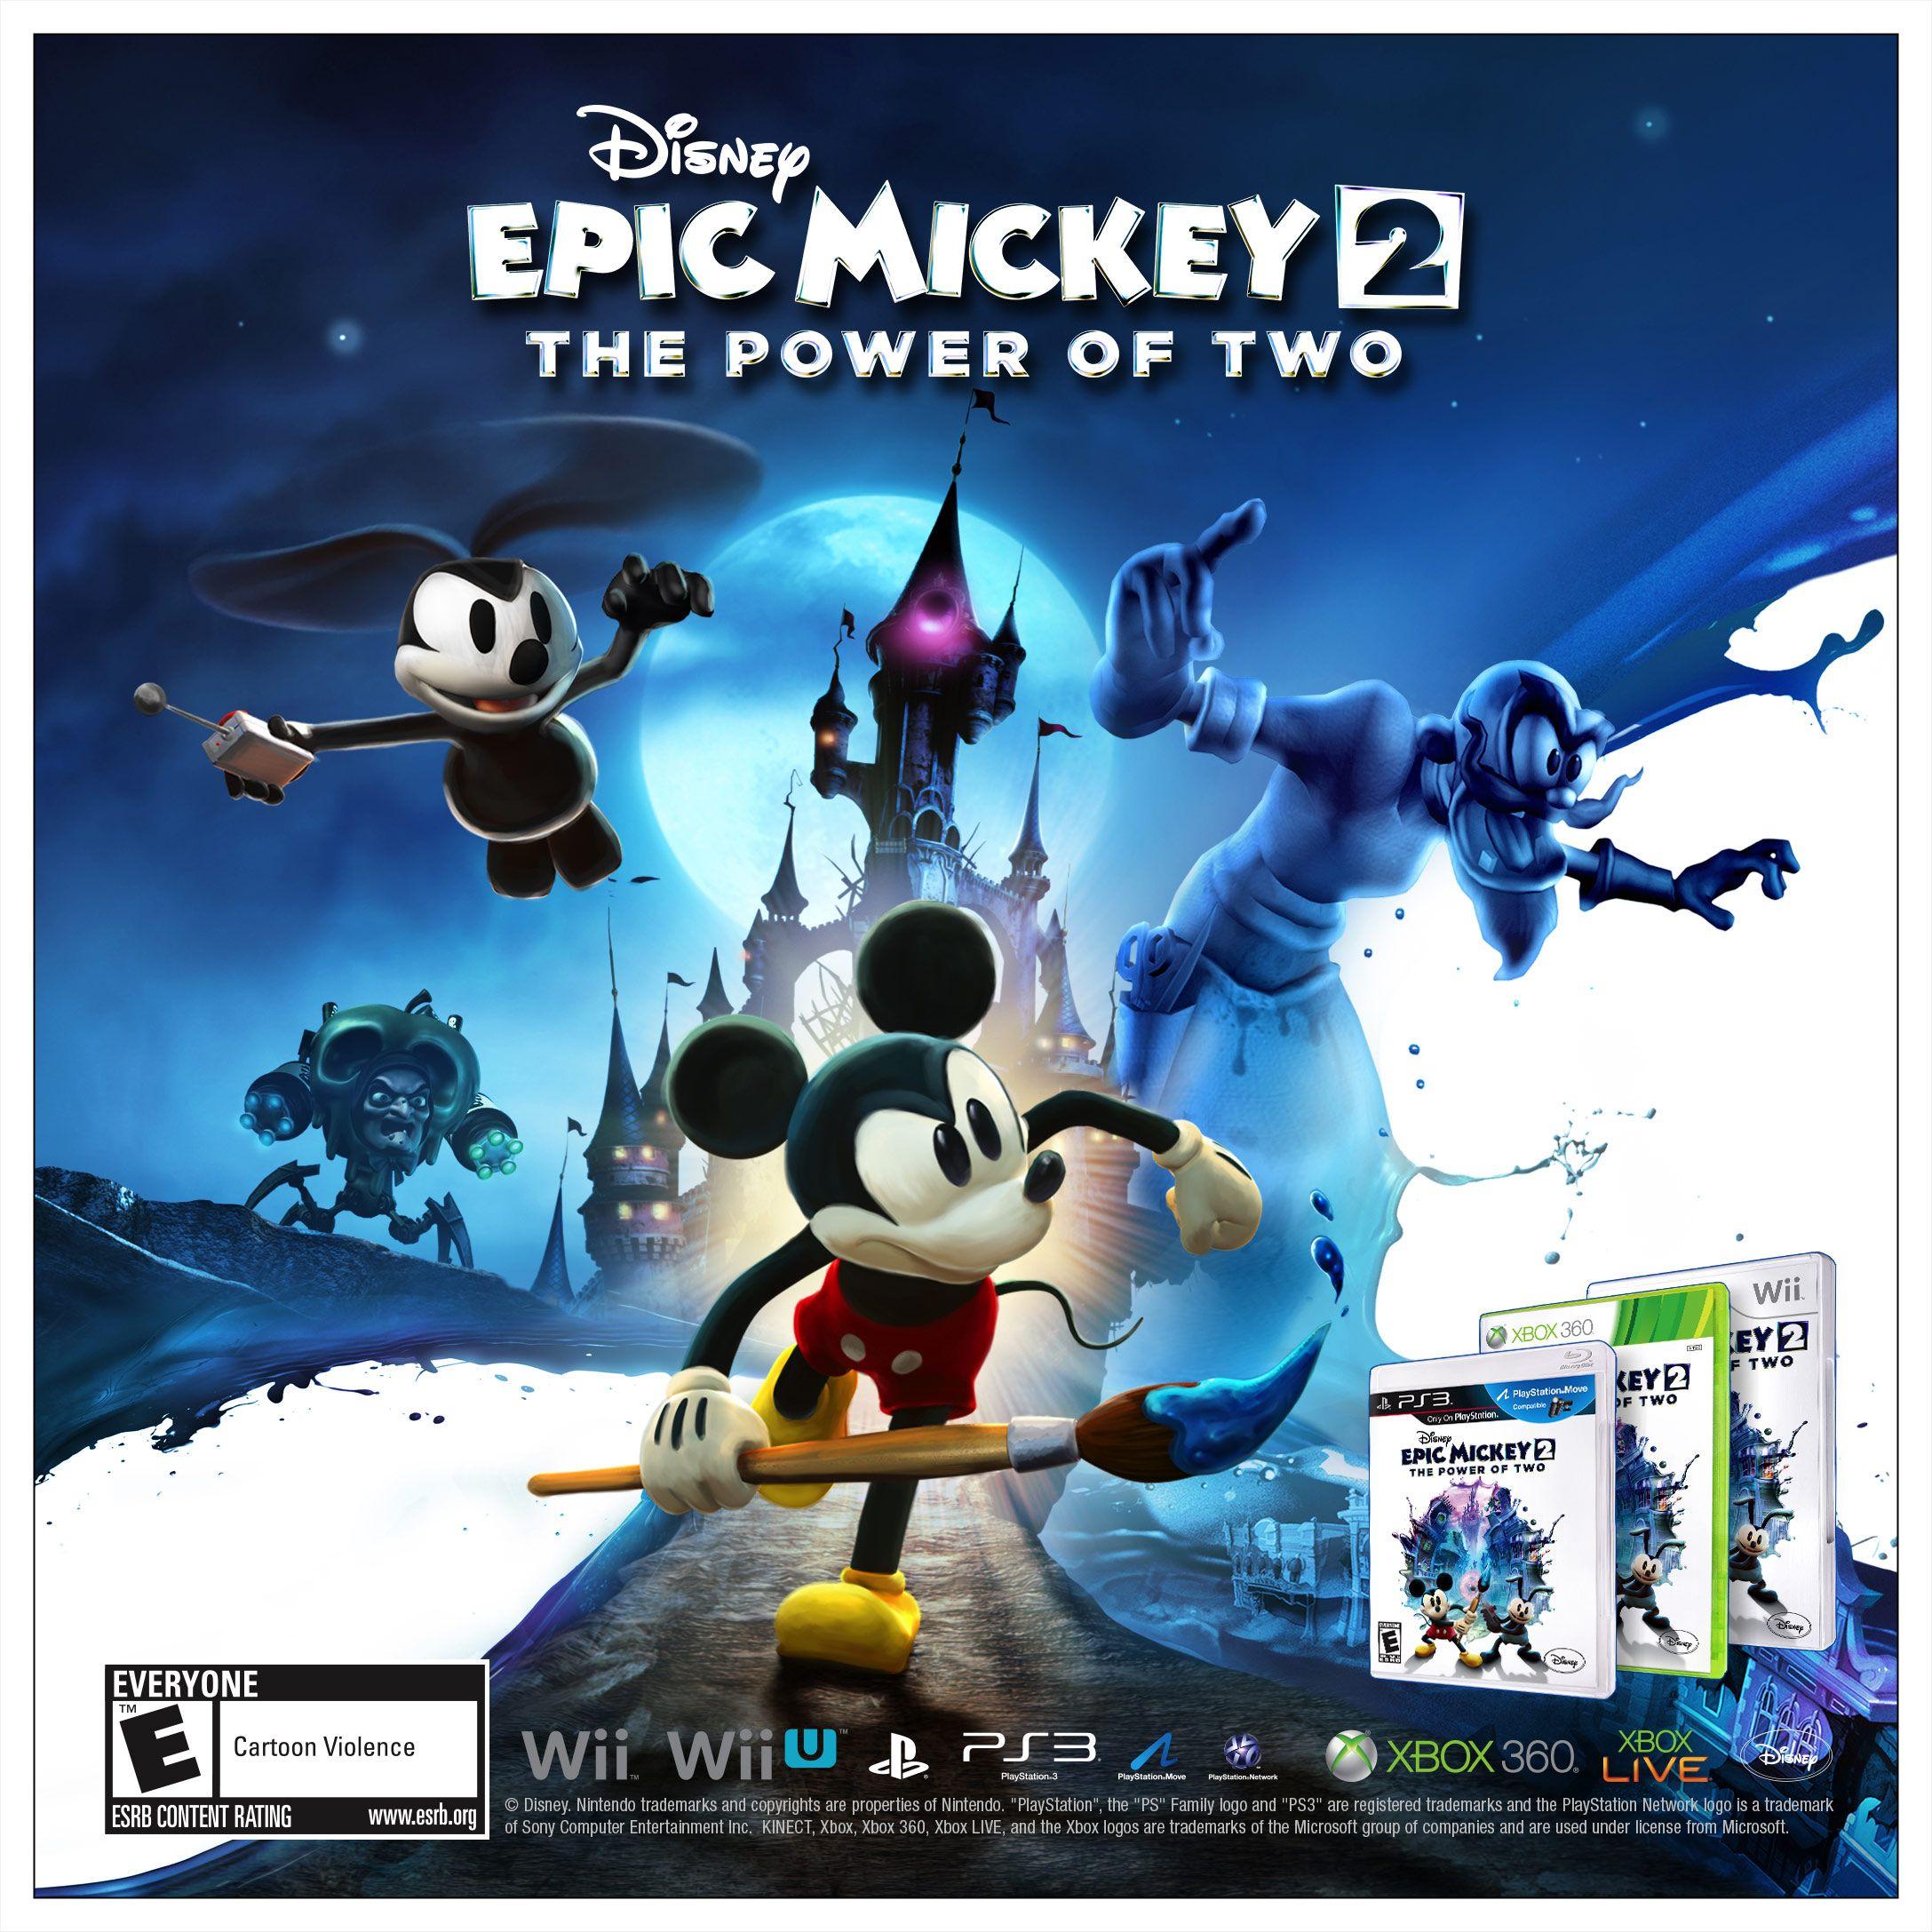 Epic Mickey 2 Logo - Ant Farm: Disney Epic Mickey 2: Out of Home